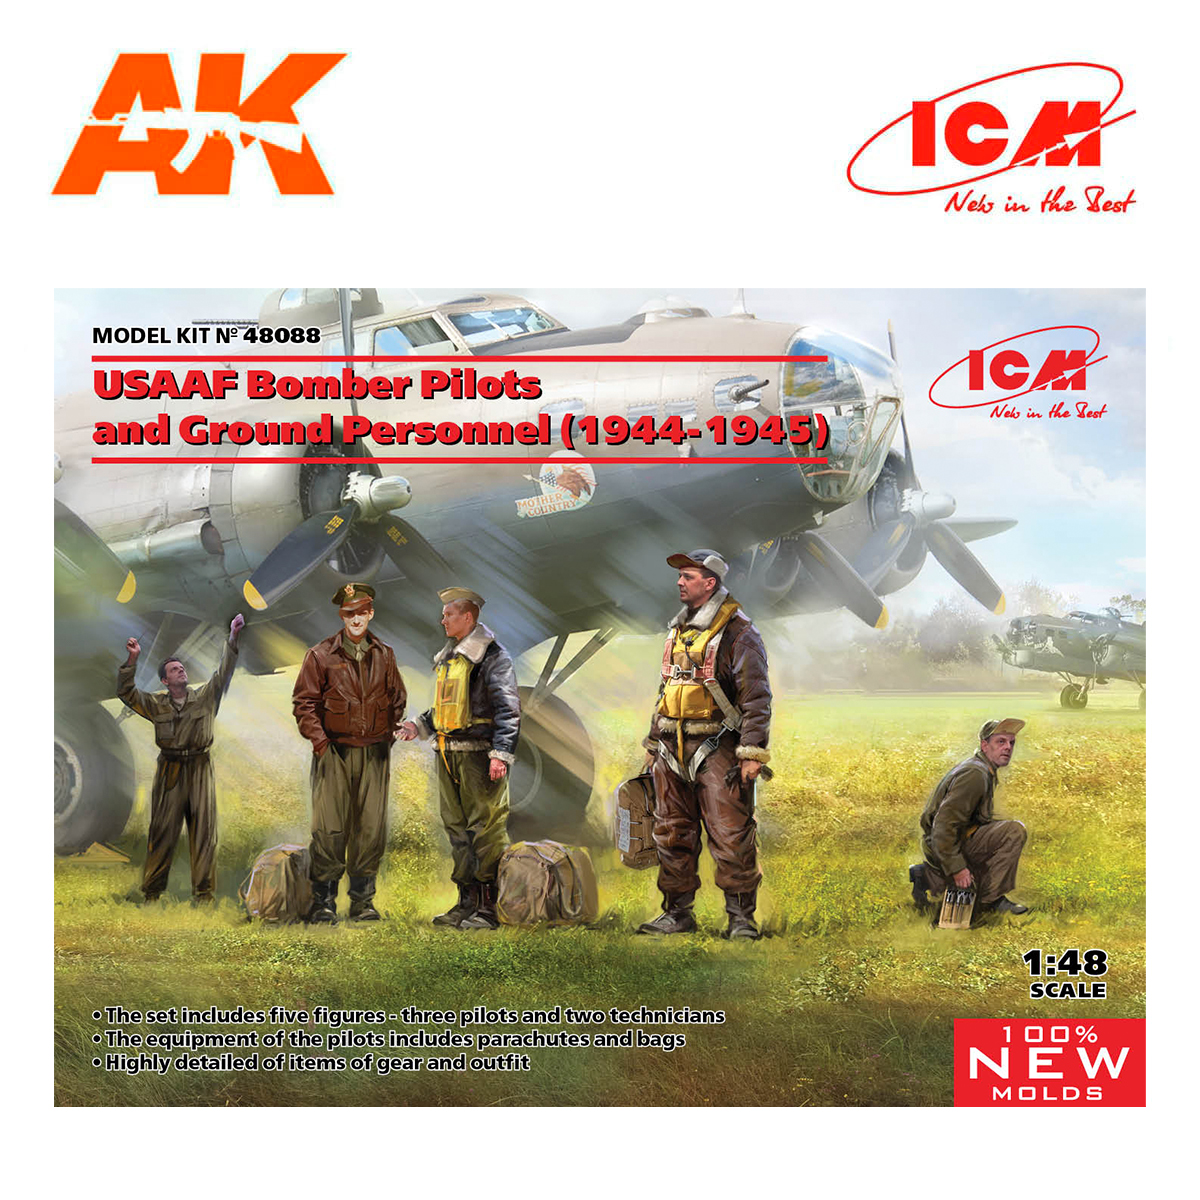 USAAF Bomber Pilots and Ground Personnel (1944-1945) (100% new molds) 1/48